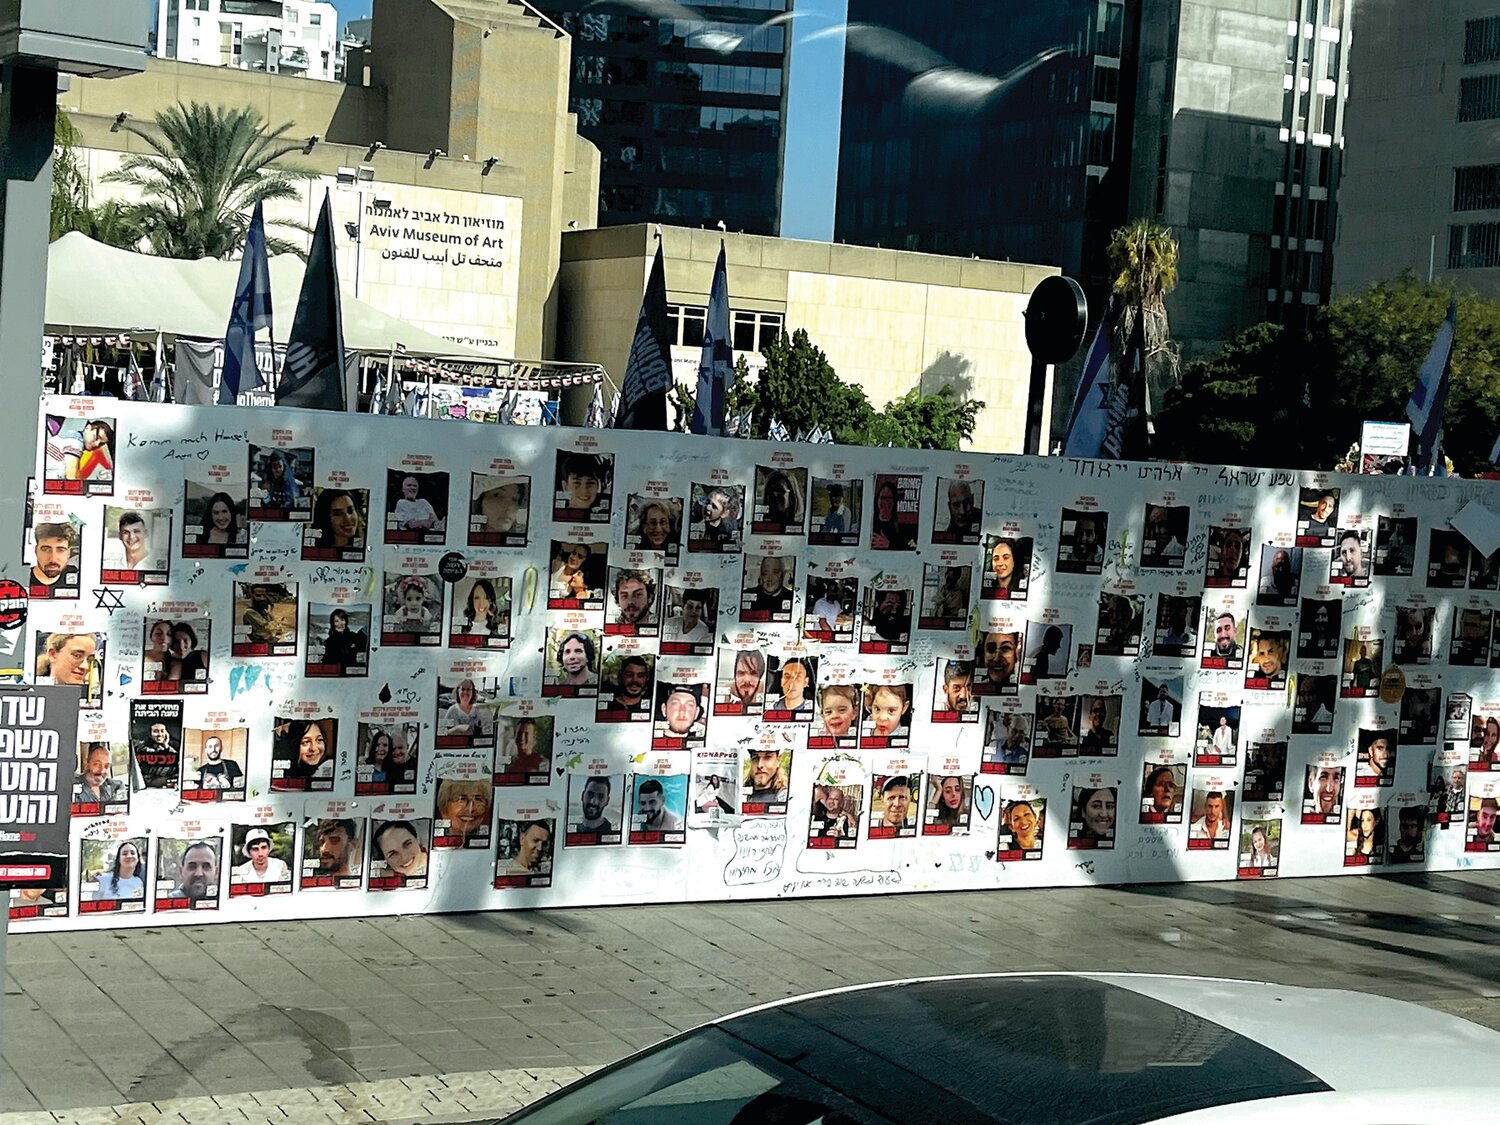 Photos of the hostages taken during the Oct. 7 massacre by Hamas in Israel could be seen in many parts of Tel Aviv, the Rabbis said.